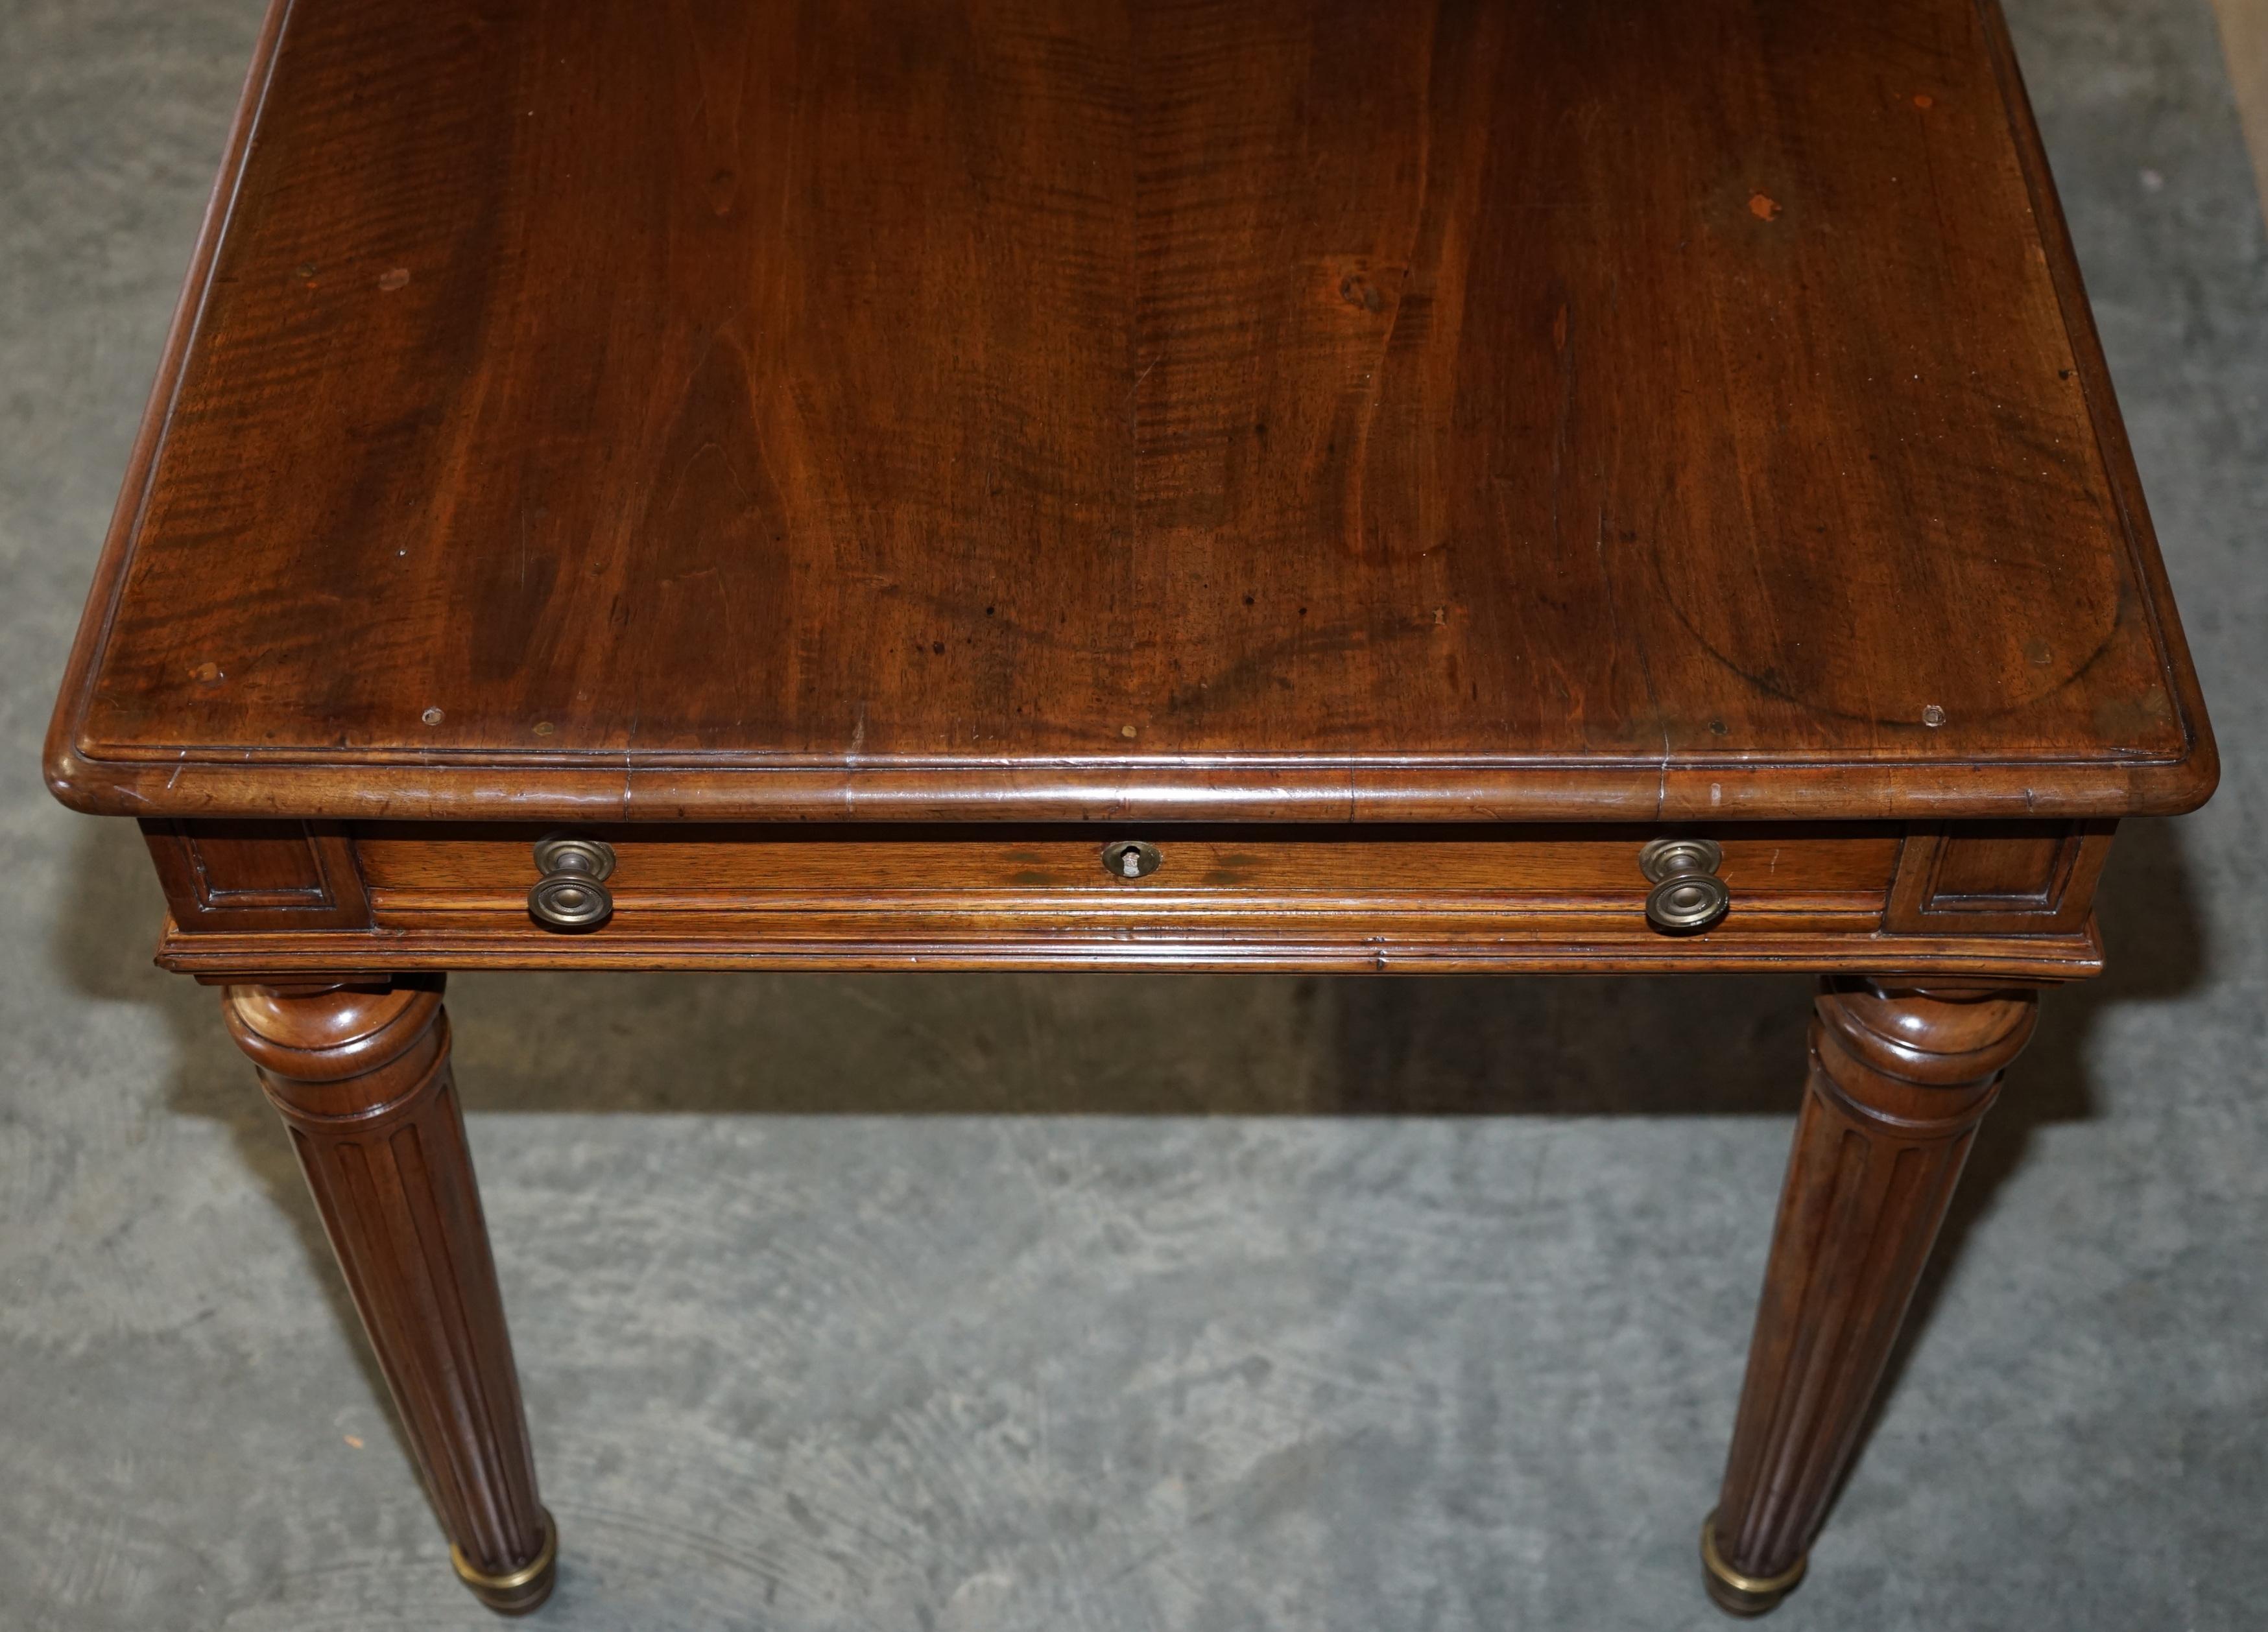 Rare Antique circa 1860 Library Writing Table Desk with Twin Writing Slopes For Sale 8